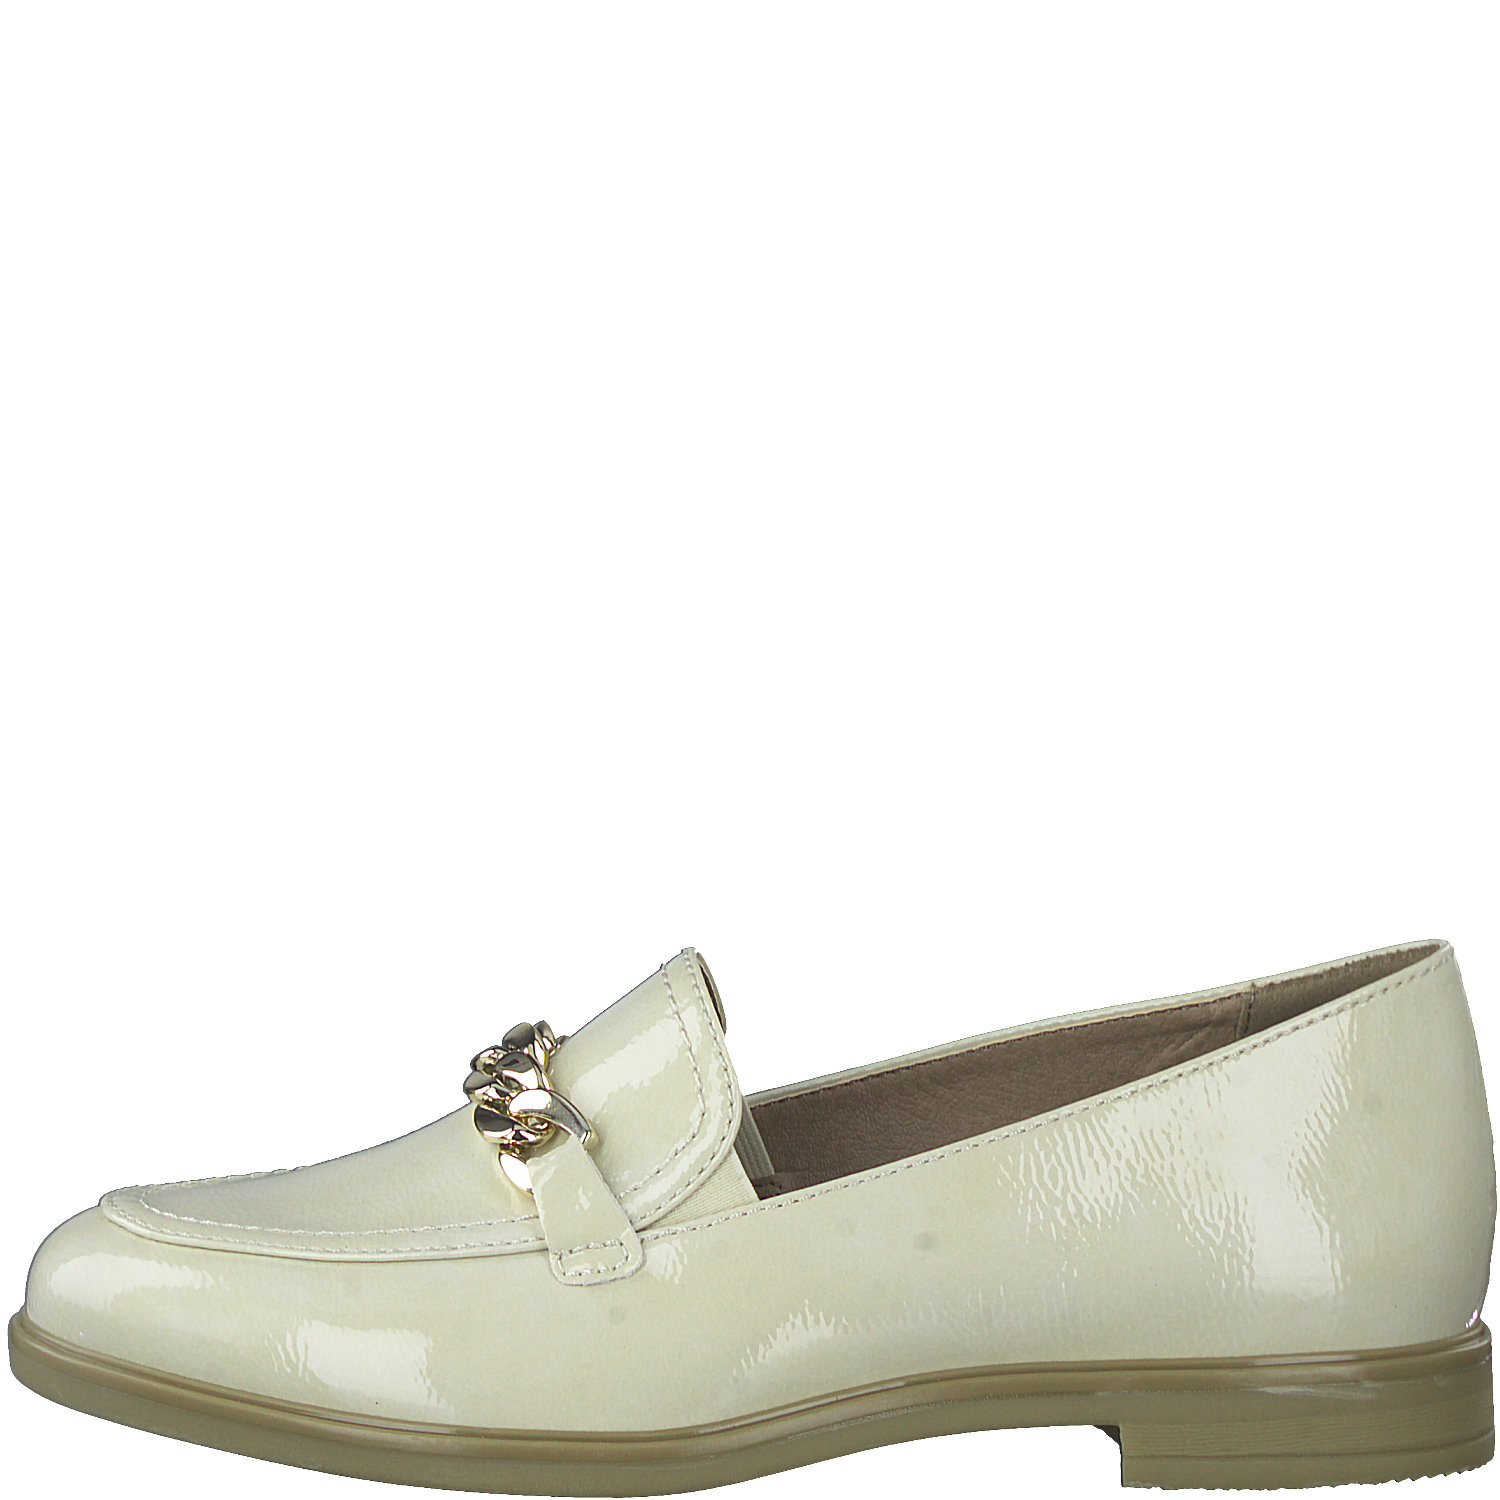 Beige Patent Loafers with Glossy Finish and Gold Chain-Link